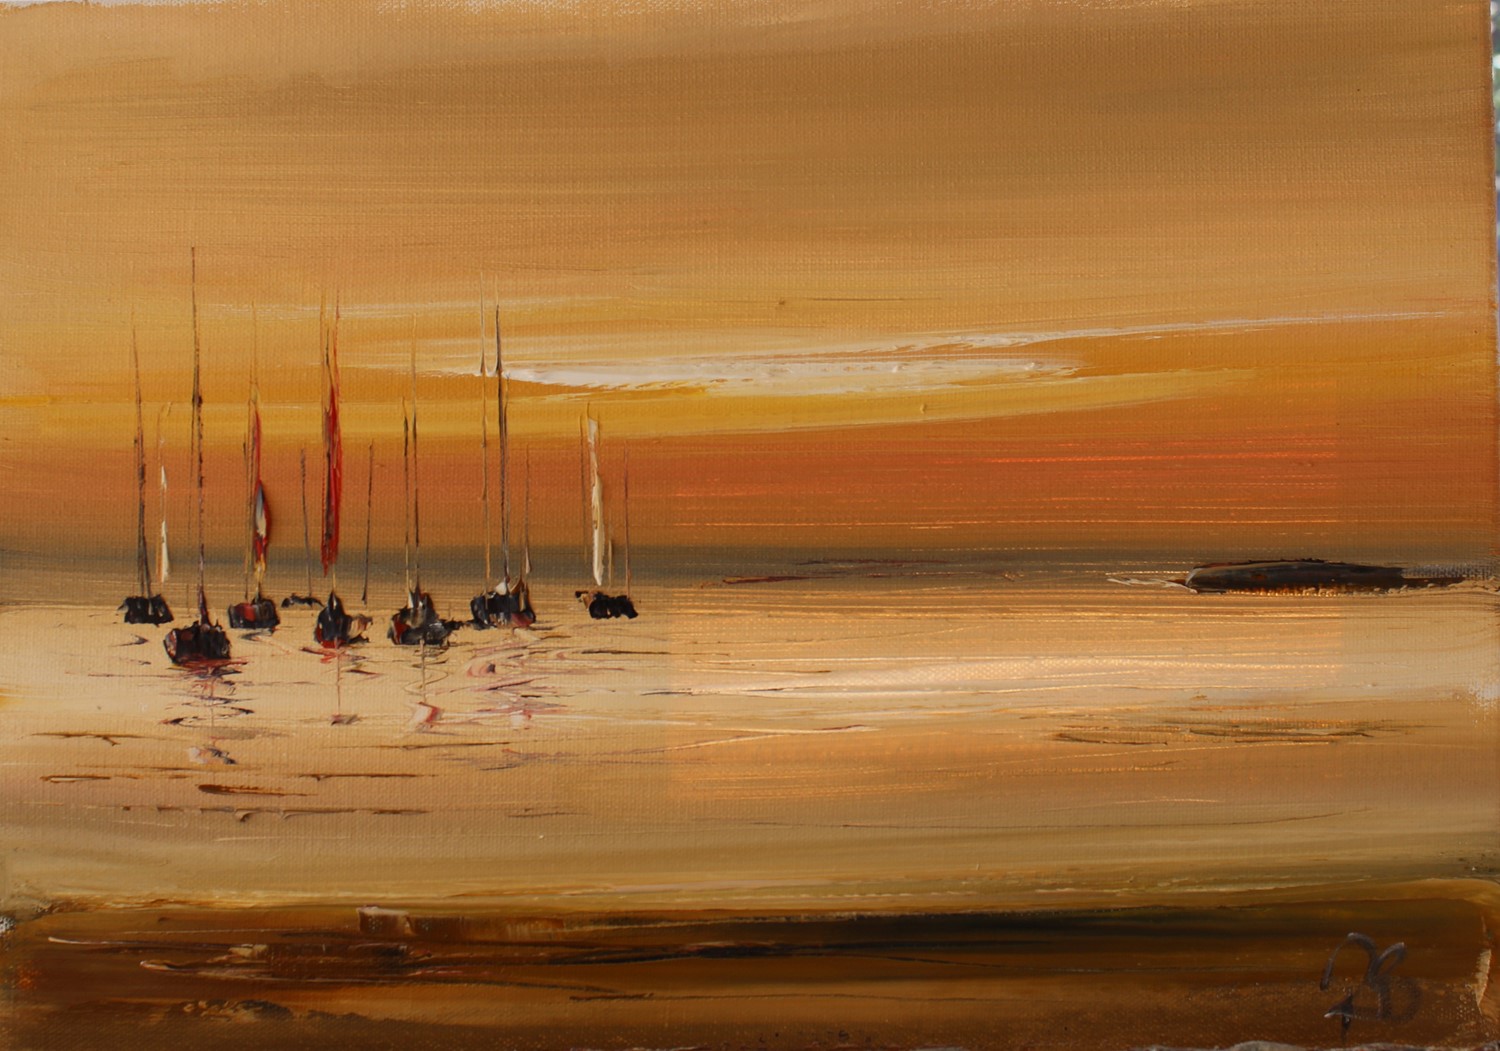 'Yachts and summer nights' by artist Rosanne Barr